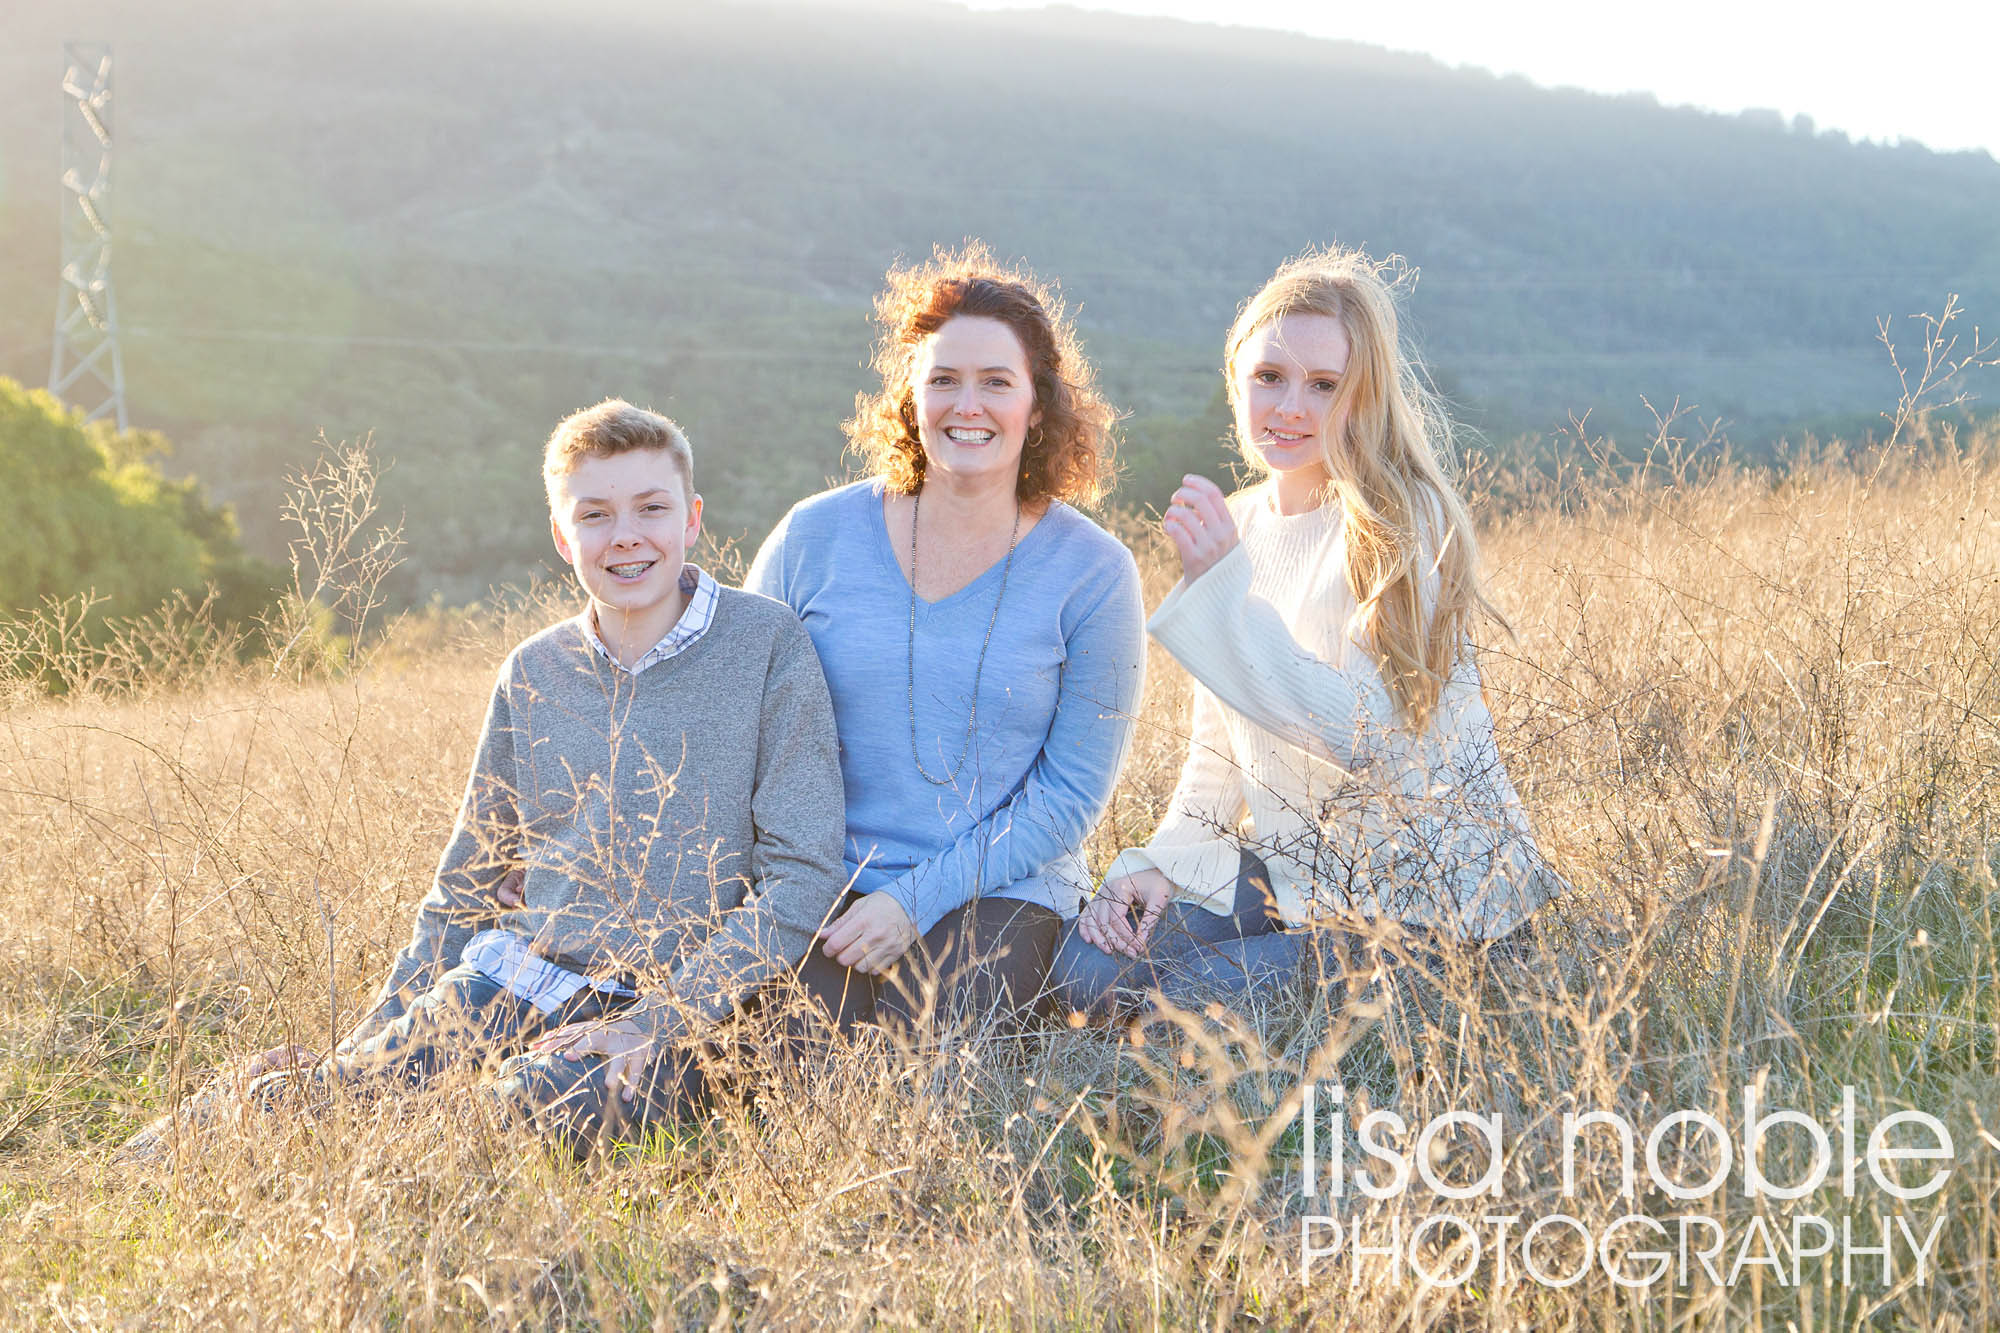 Professional family photography in the golden Bay Area hills